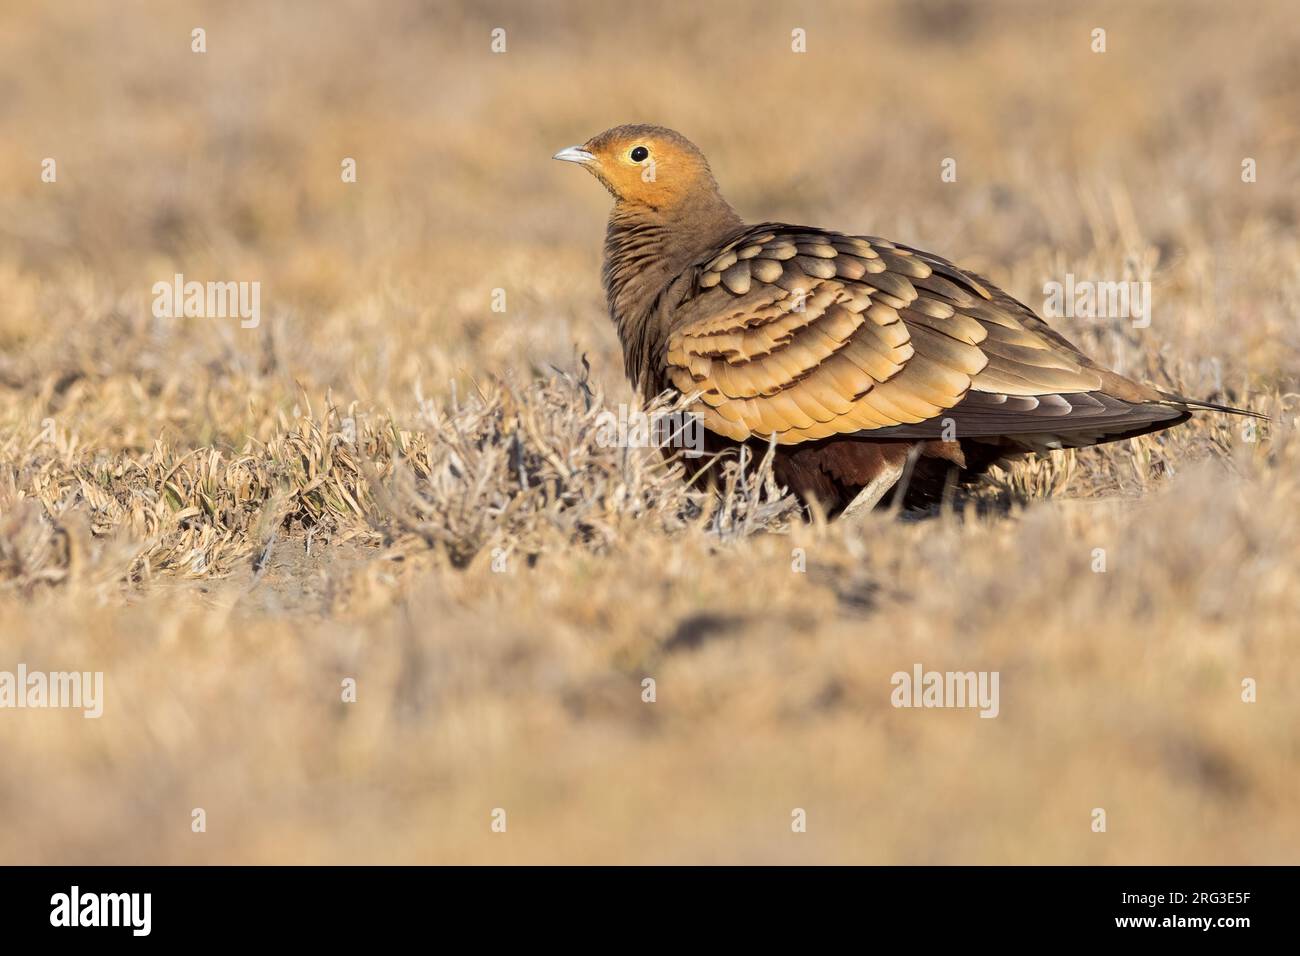 Chestnut-bellied Sandgrouse (Pterocles exustus) perched on the ground in Tanzania. Stock Photo